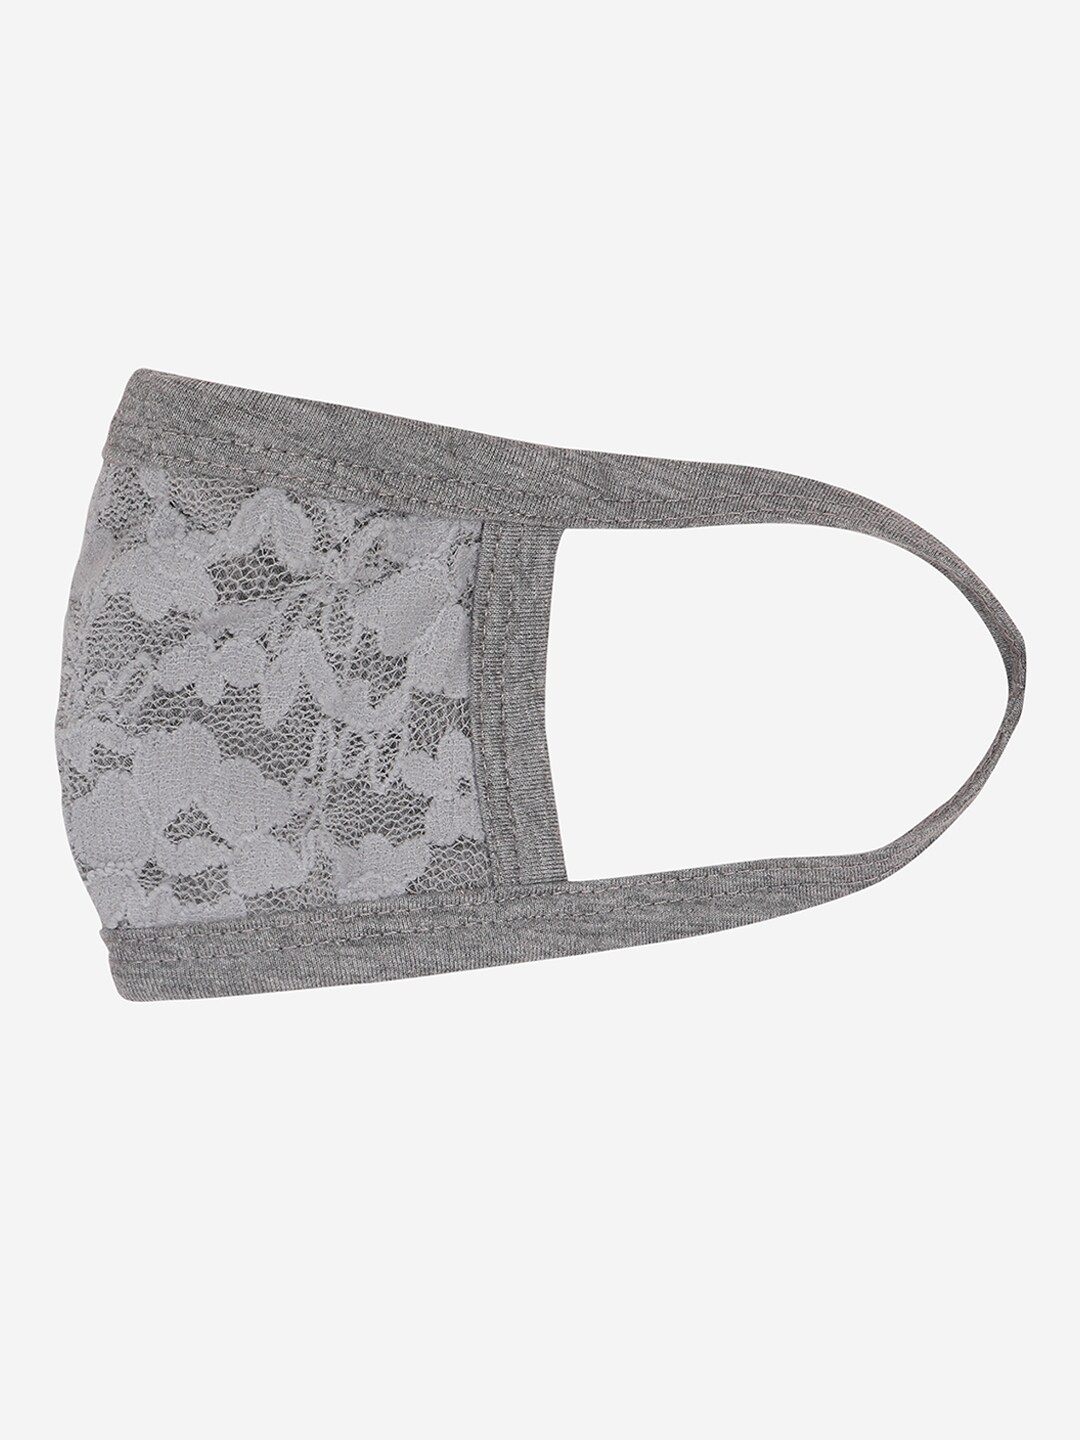 Skidlers Women Grey 2-Ply Reusable Cloth Mask Price in India